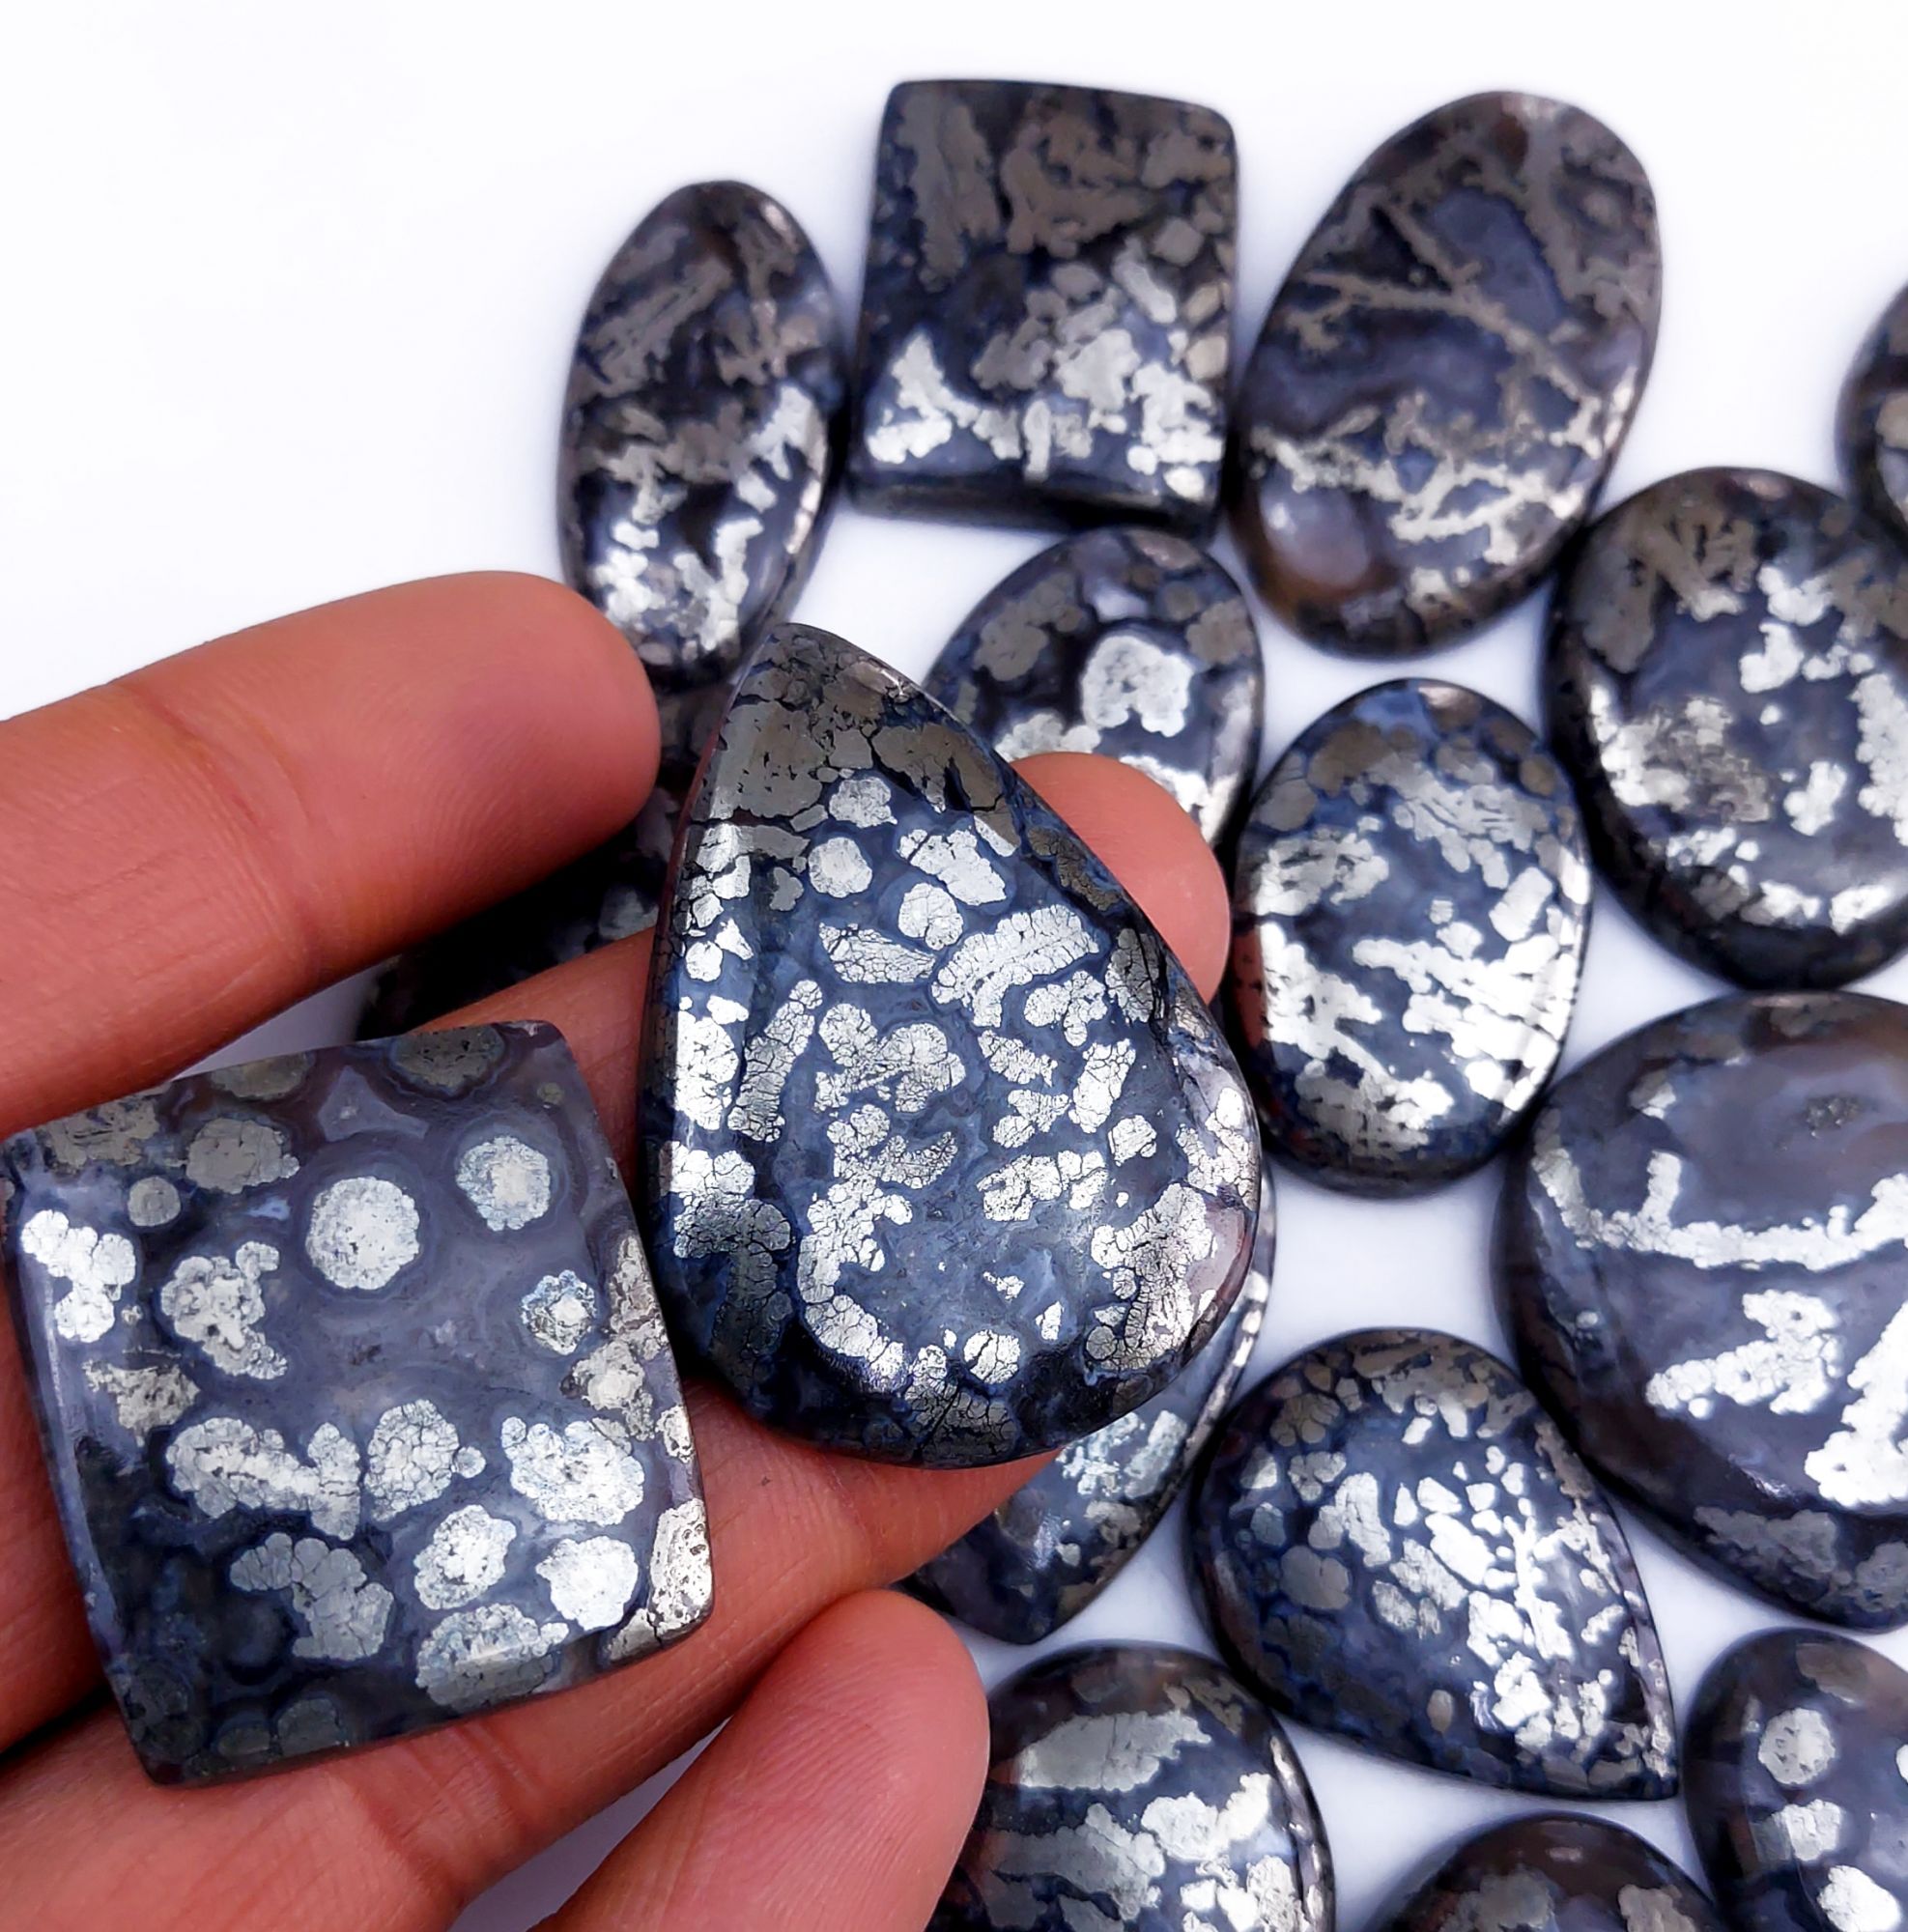 18Pcs 950Cts Natural Marcasite Grey Cabochon Back Side Unpolished Gemstone Semi-Precious Gemstones For Jewelry Making 40x30 30x20mm #10037